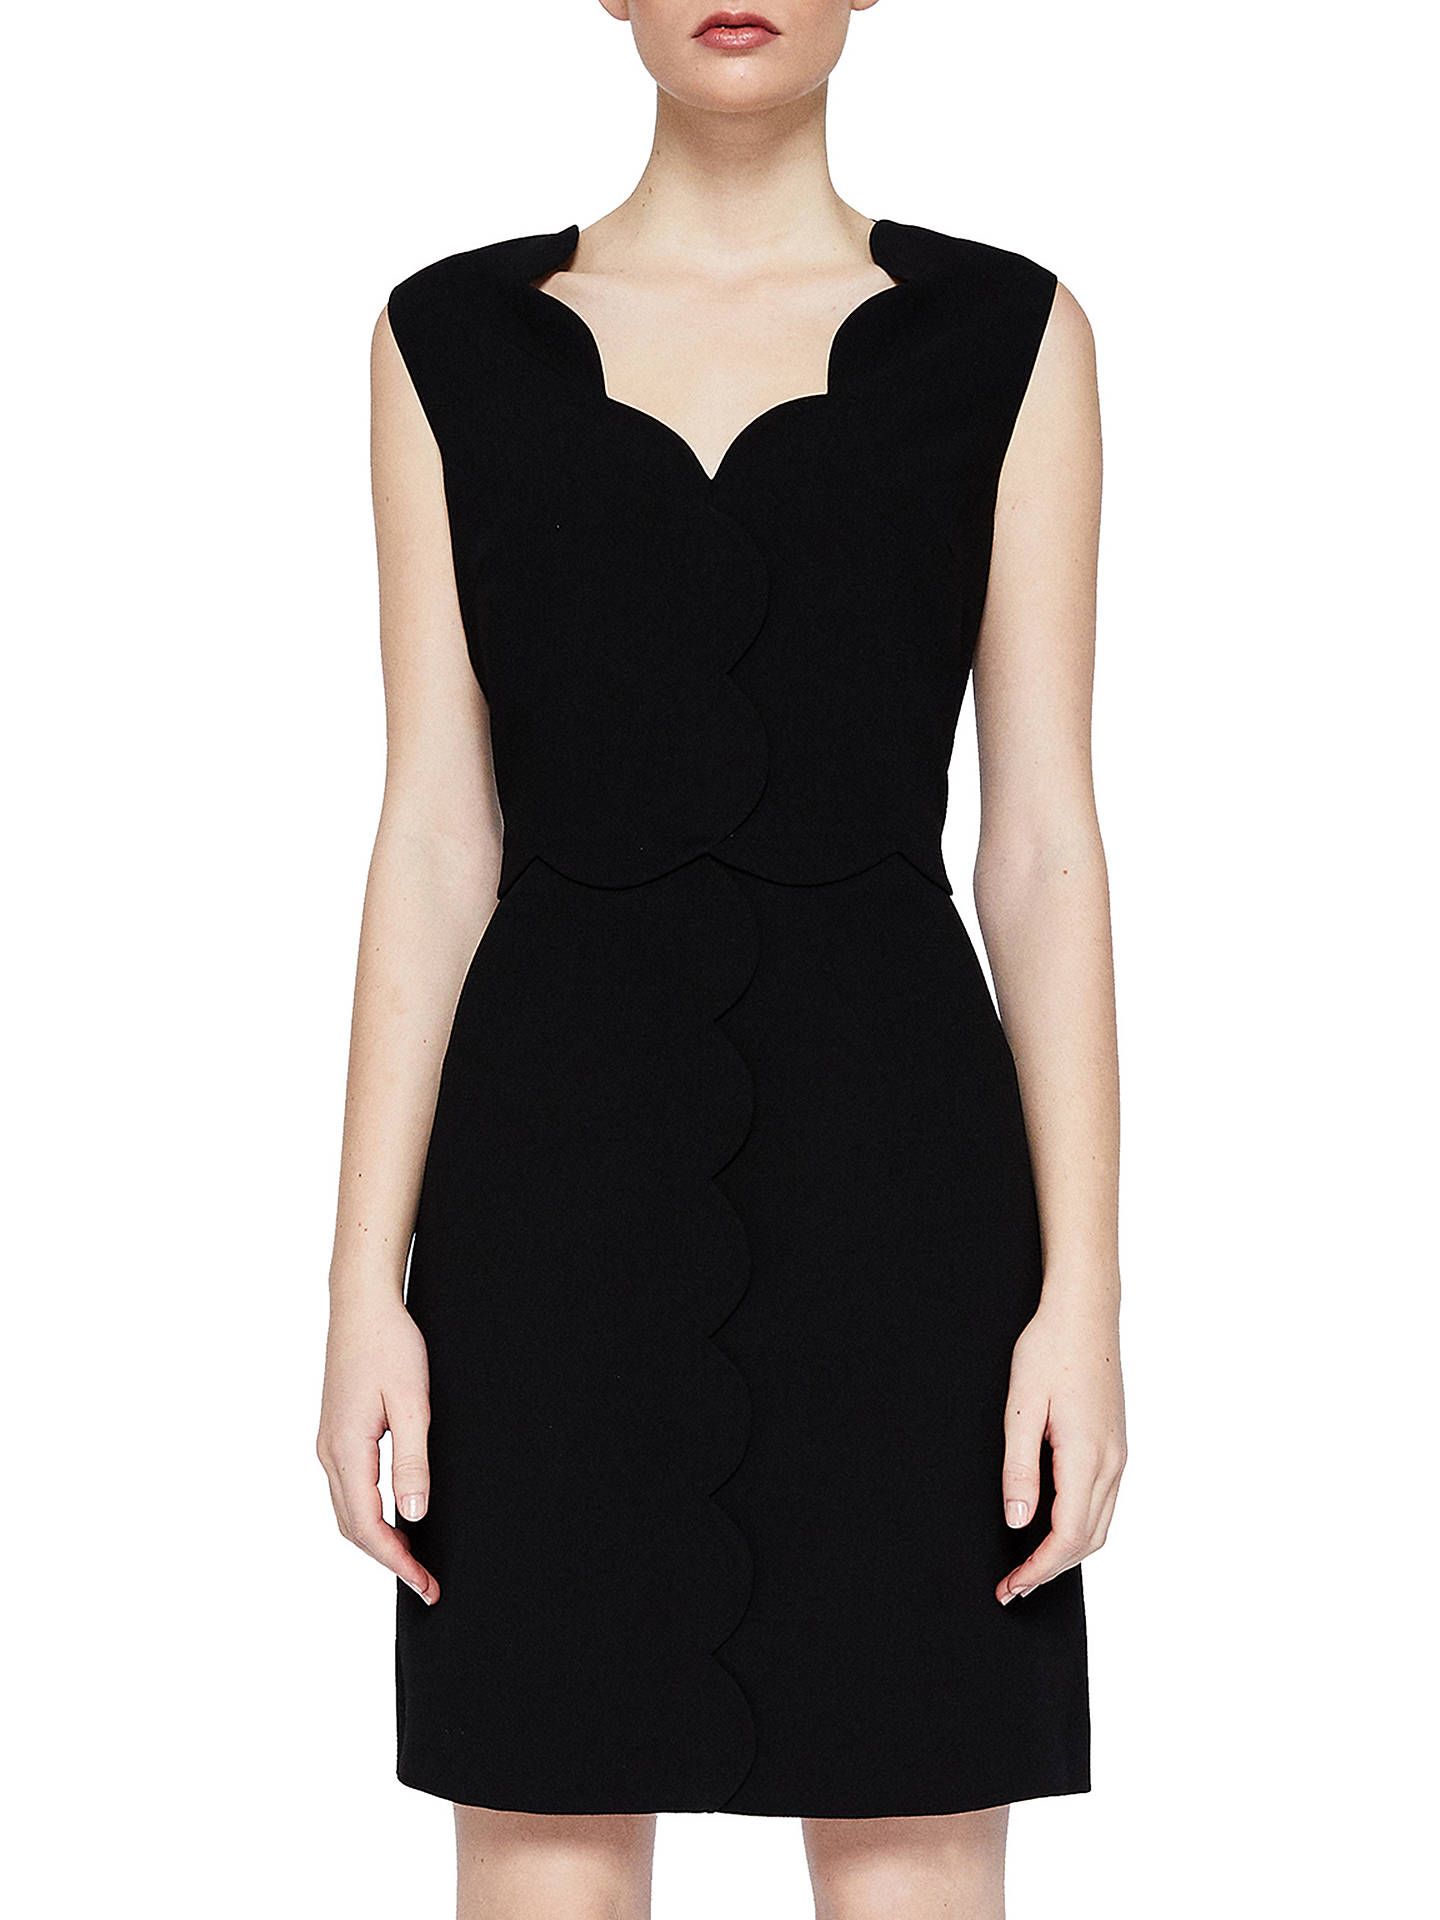 Ted Baker Rubeyed Scallop Edge Shift Dress at John Lewis & Partners